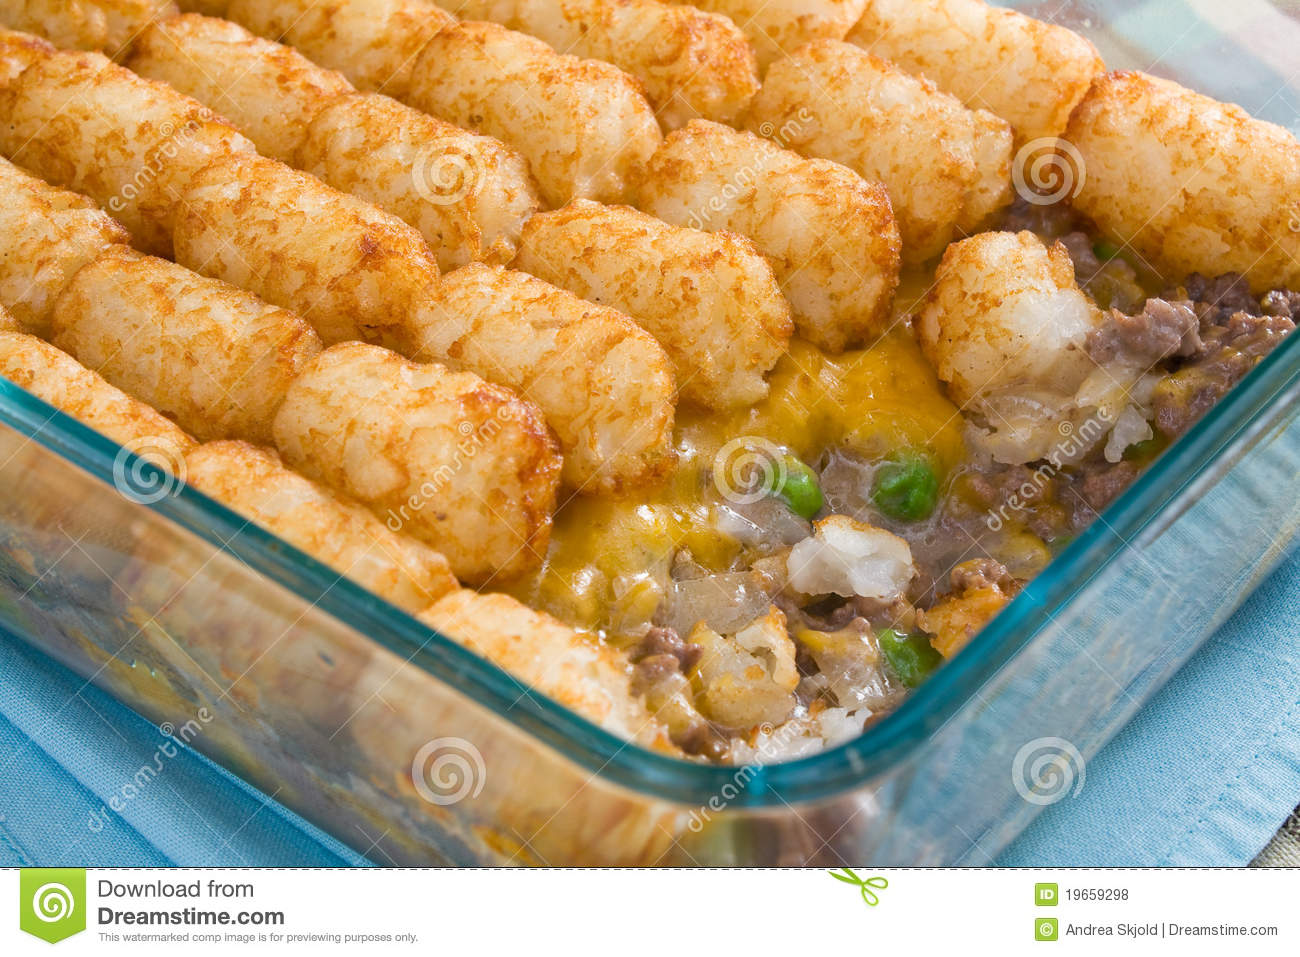 Casserole Made Of Tater Tots Cheddar Cheese Ground Beef Peas And